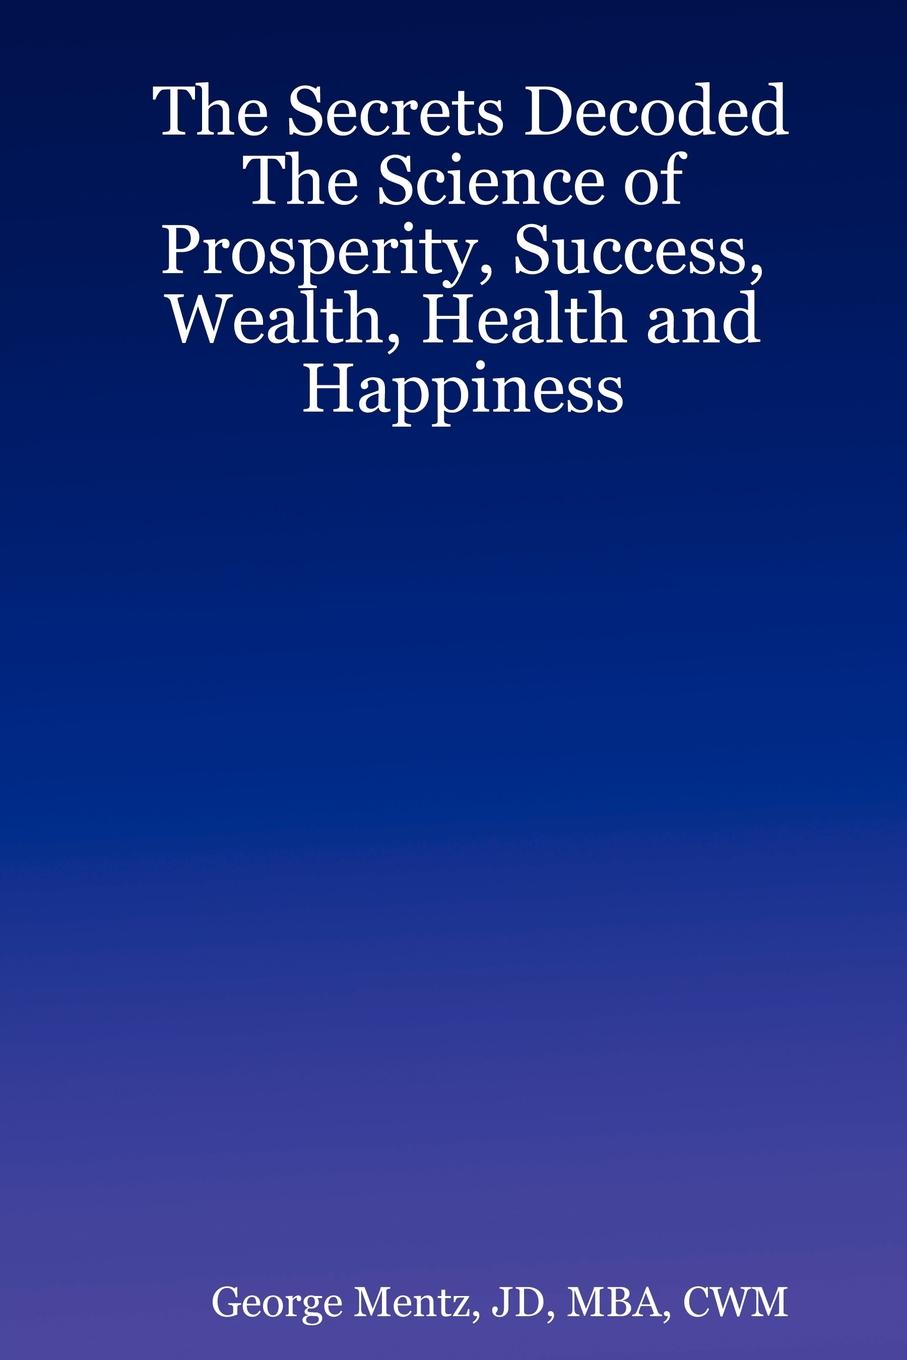 The Secrets Decoded - The Science of Prosperity, Success, Wealth, Health and Happiness